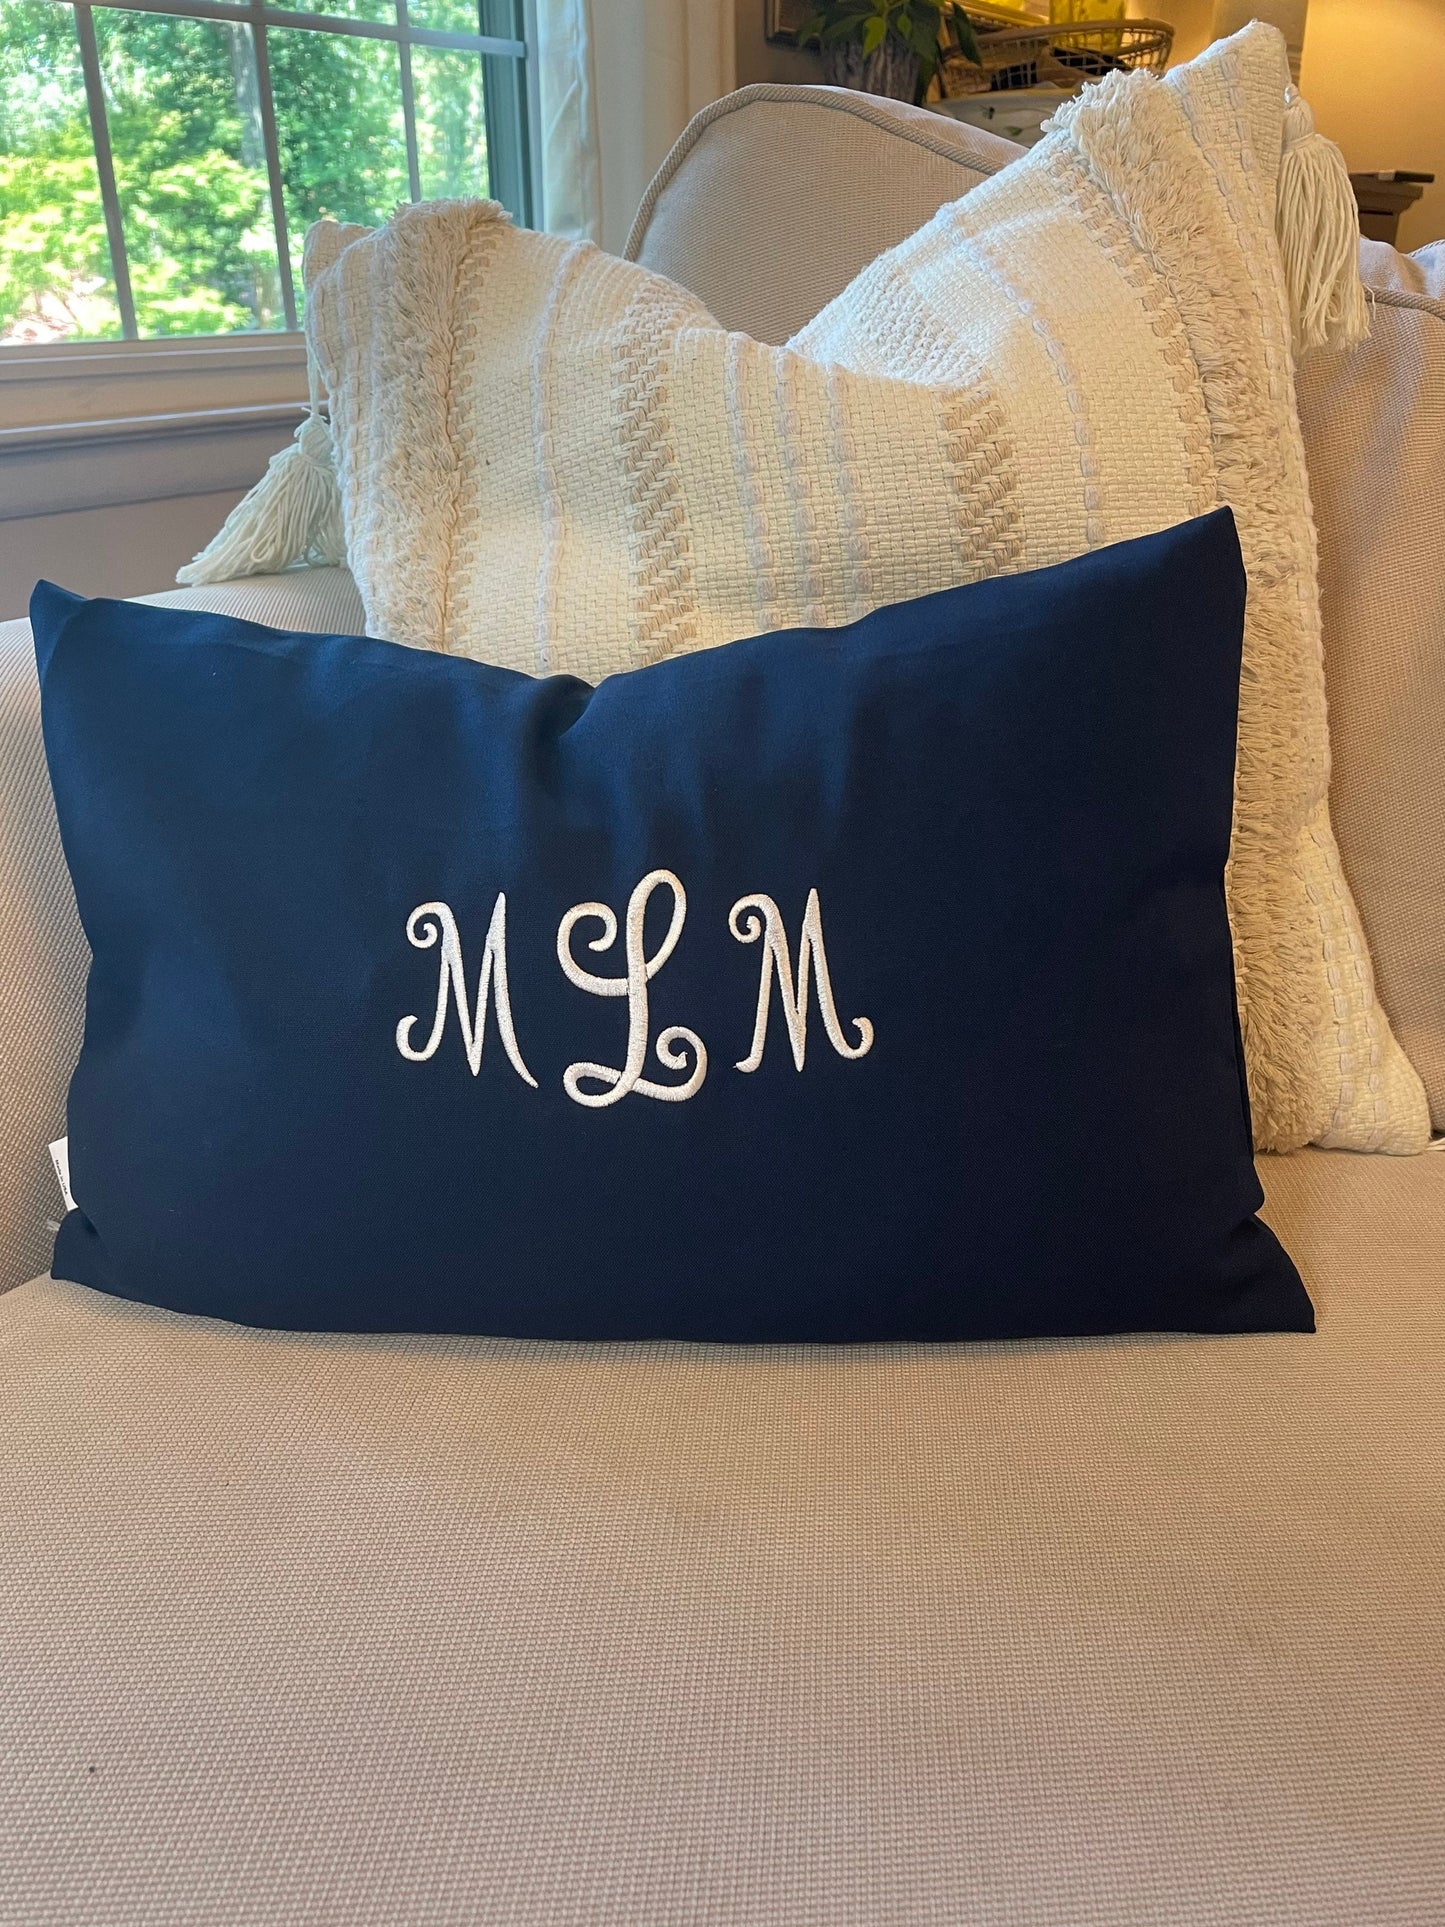 Embroidered - Monogrammed Pillow Cover/Sham - Customized - Personalized Gift Idea - Polyester Sham